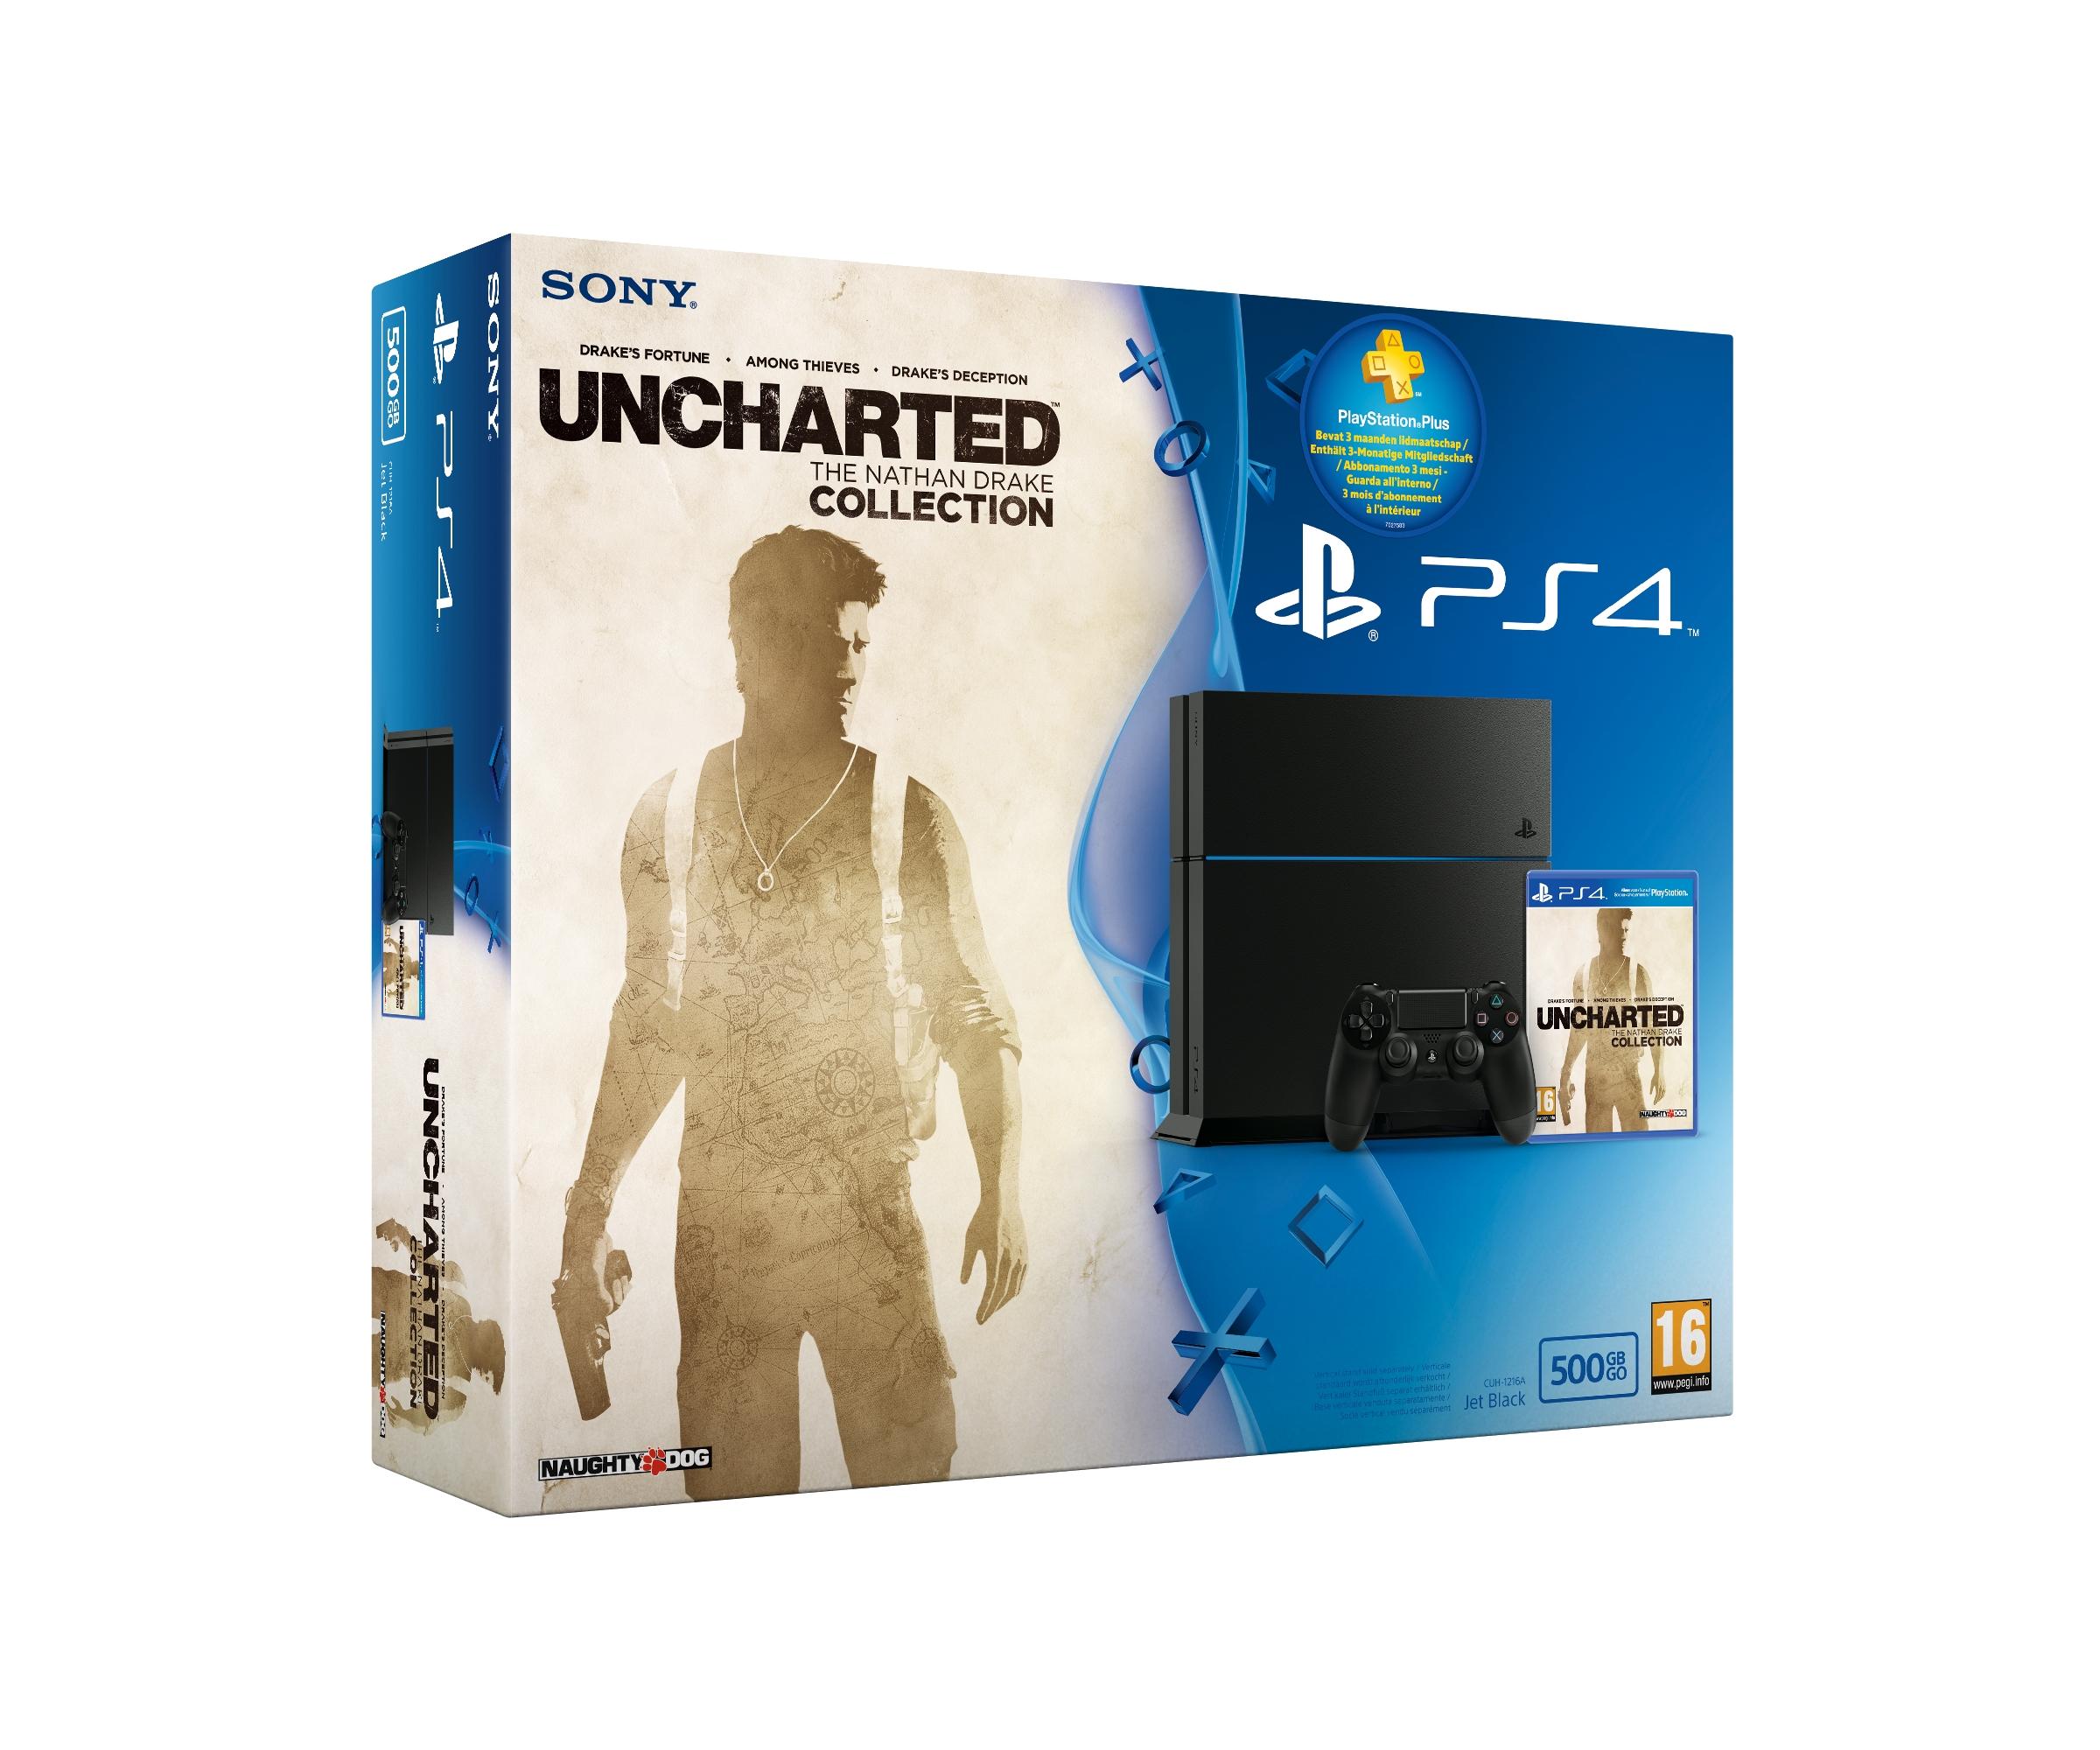 PlayStation 4 (500 GB) + Uncharted: The Nathan Drake Collection (PS4), Sony Computer Entertainment